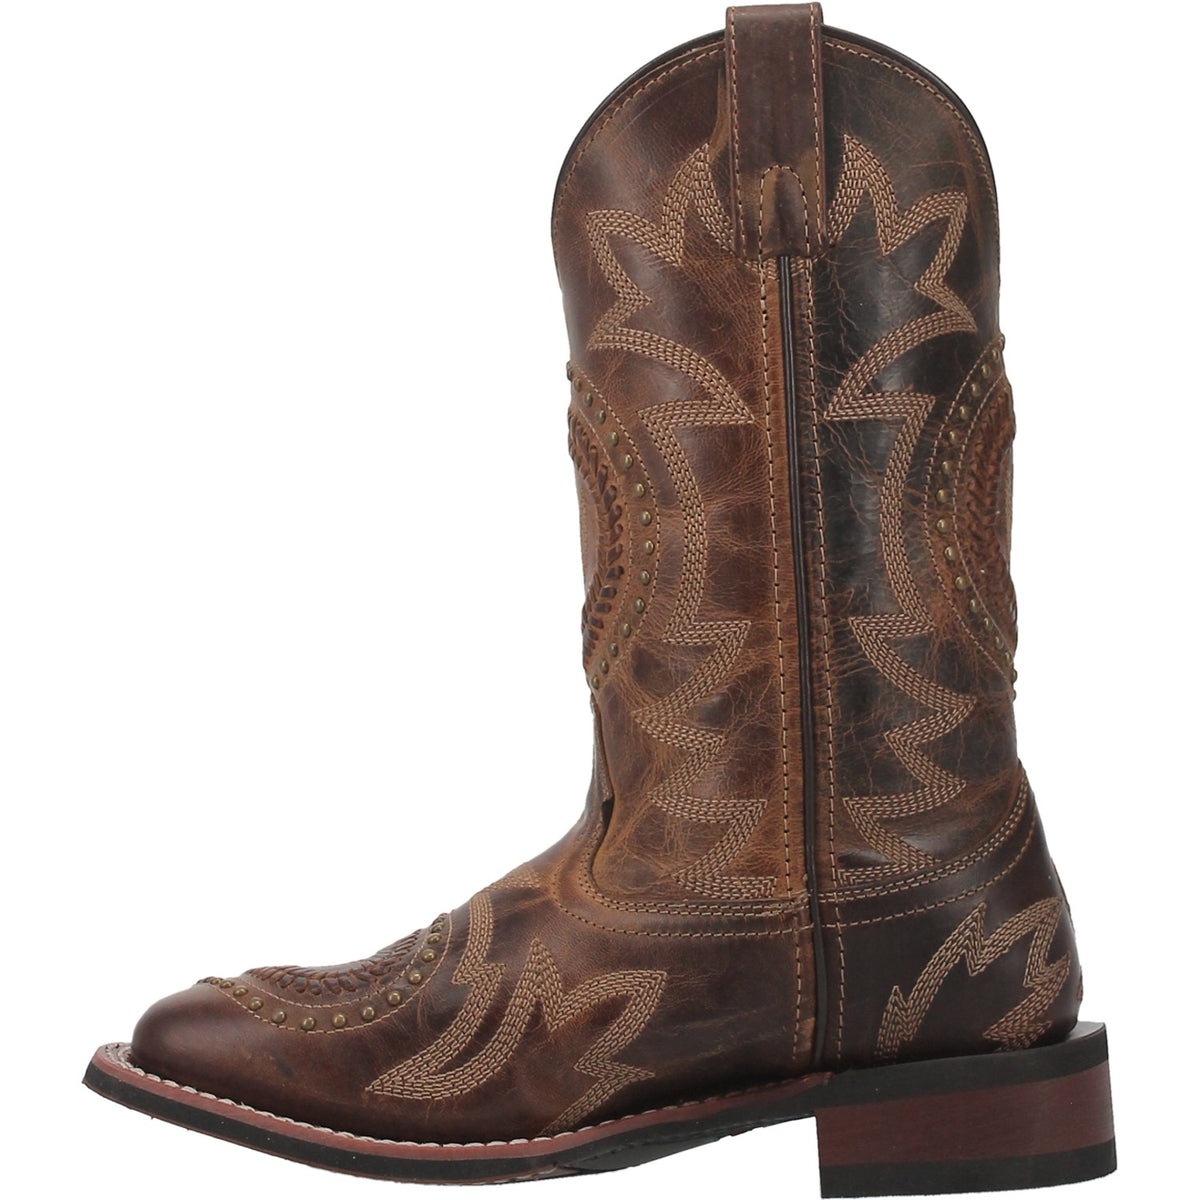 CHARLI LEATHER BOOT Cover